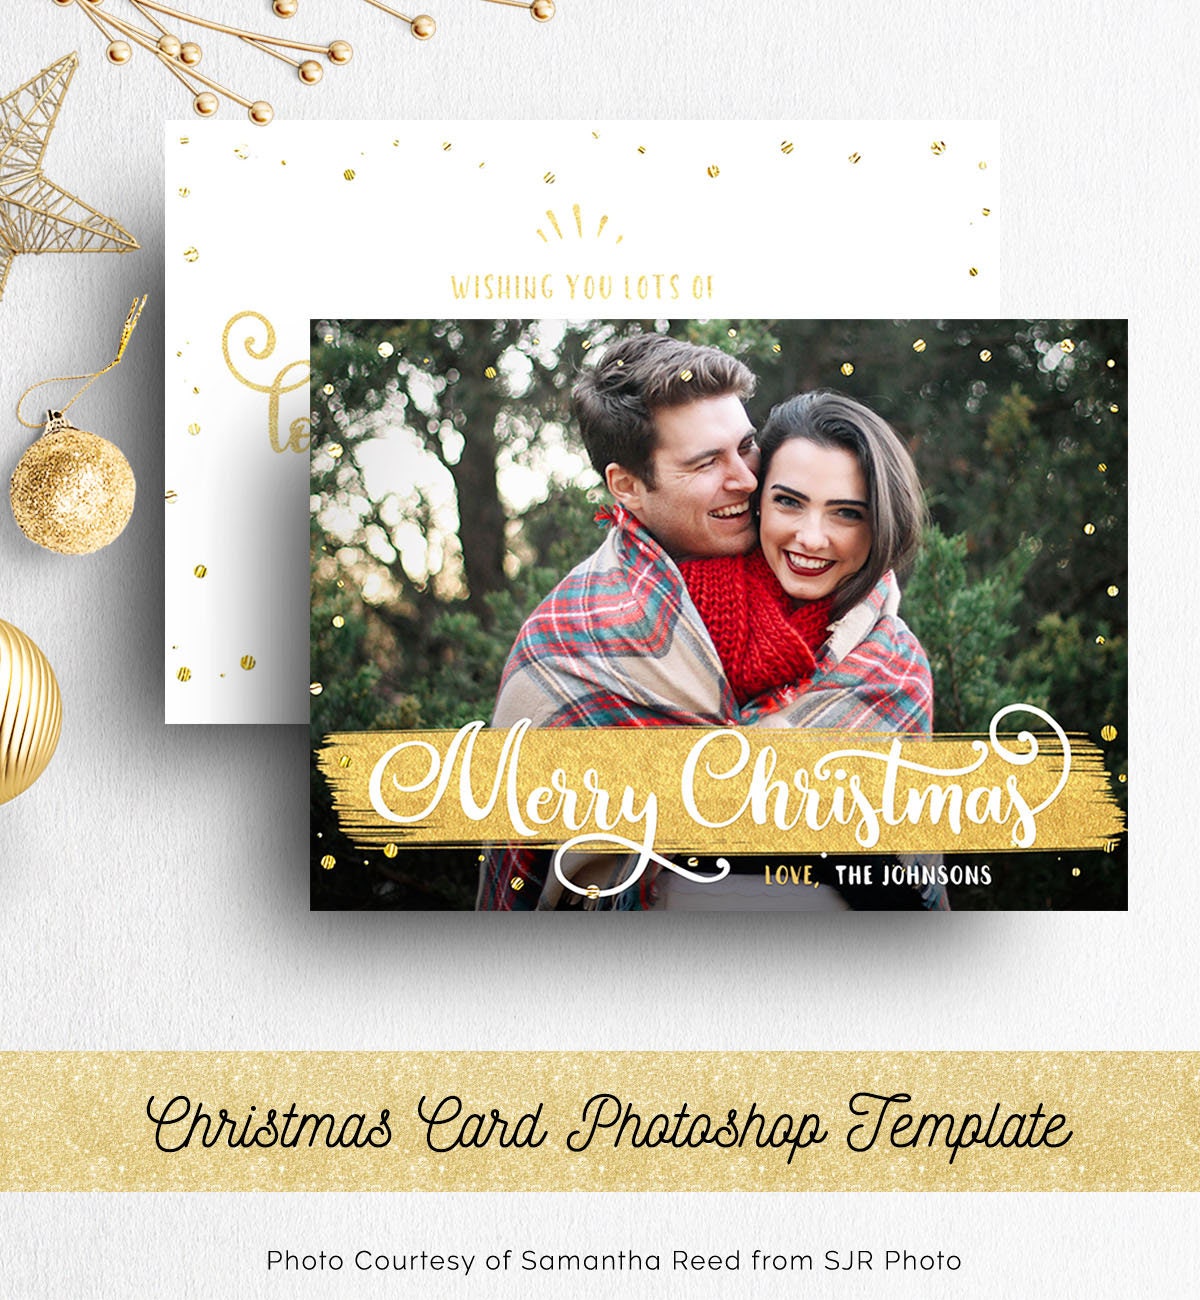 Christmas Card Photoshop Template from i.etsystatic.com